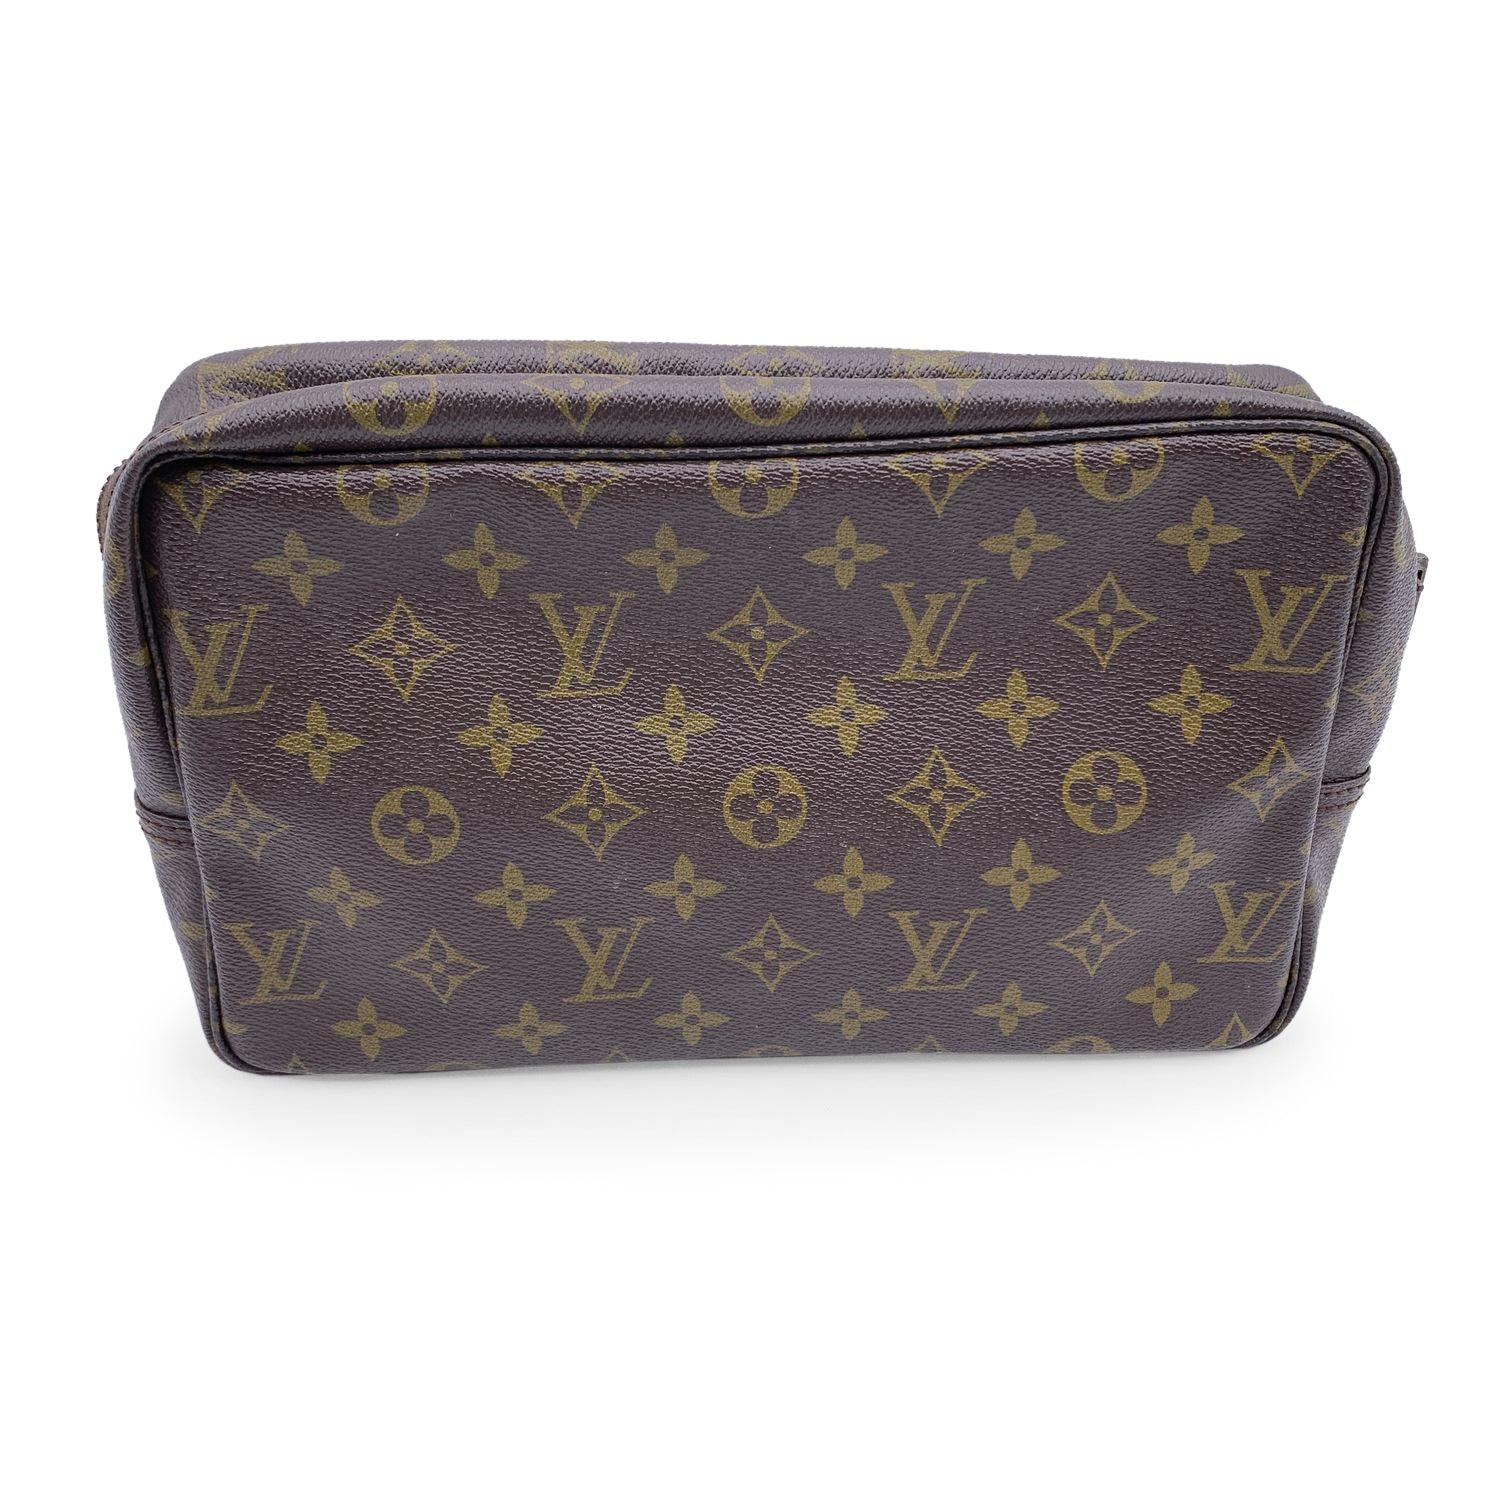 Louis Vuitton Vintage Monogram Trousse 28 Cosmetic Bag M47522 In Good Condition For Sale In Rome, Rome